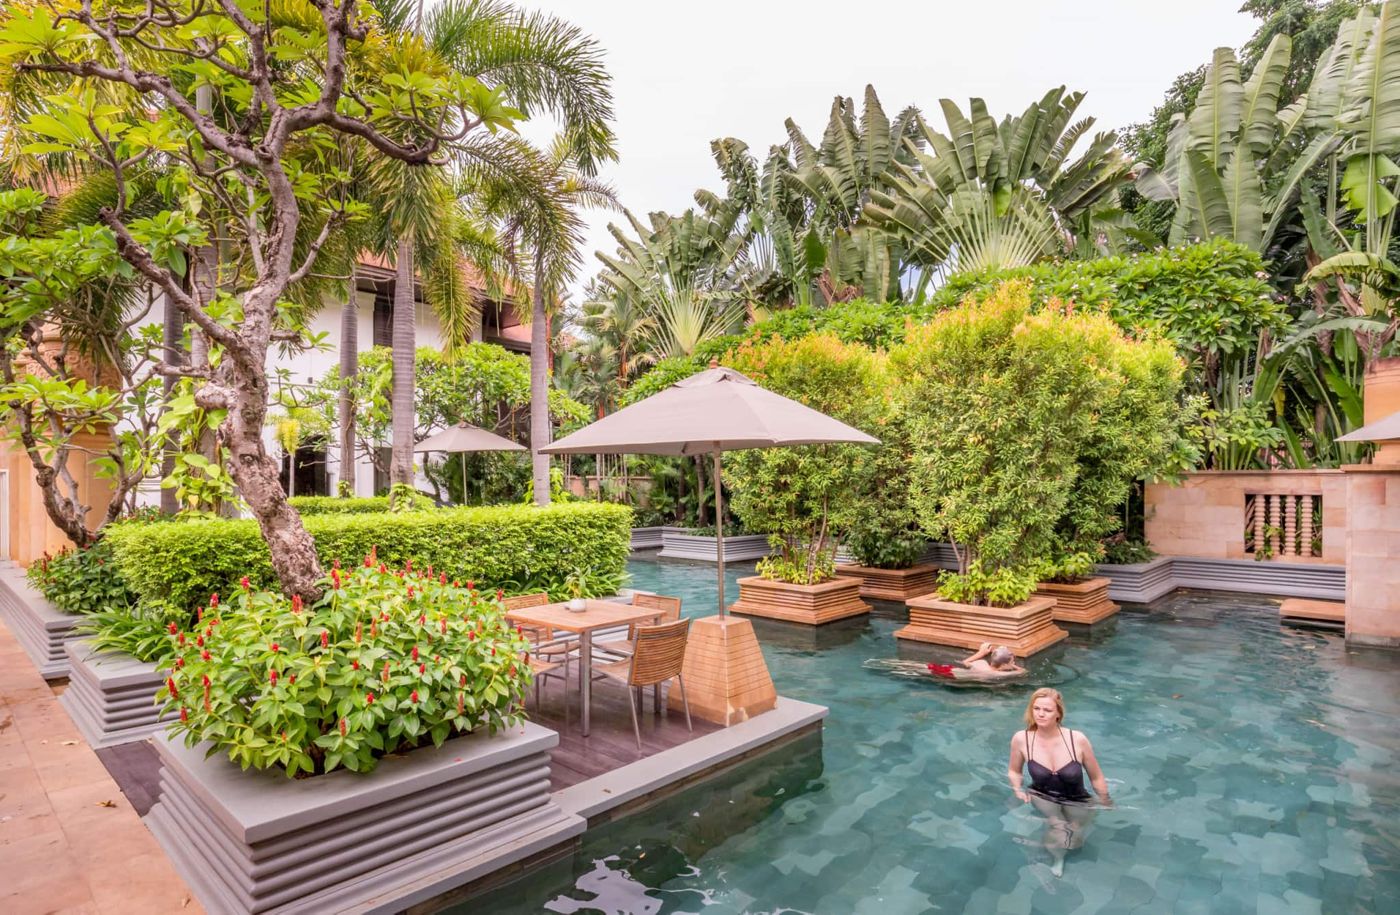 Stay at these top luxury hotels in Siem Reap, Cambodia